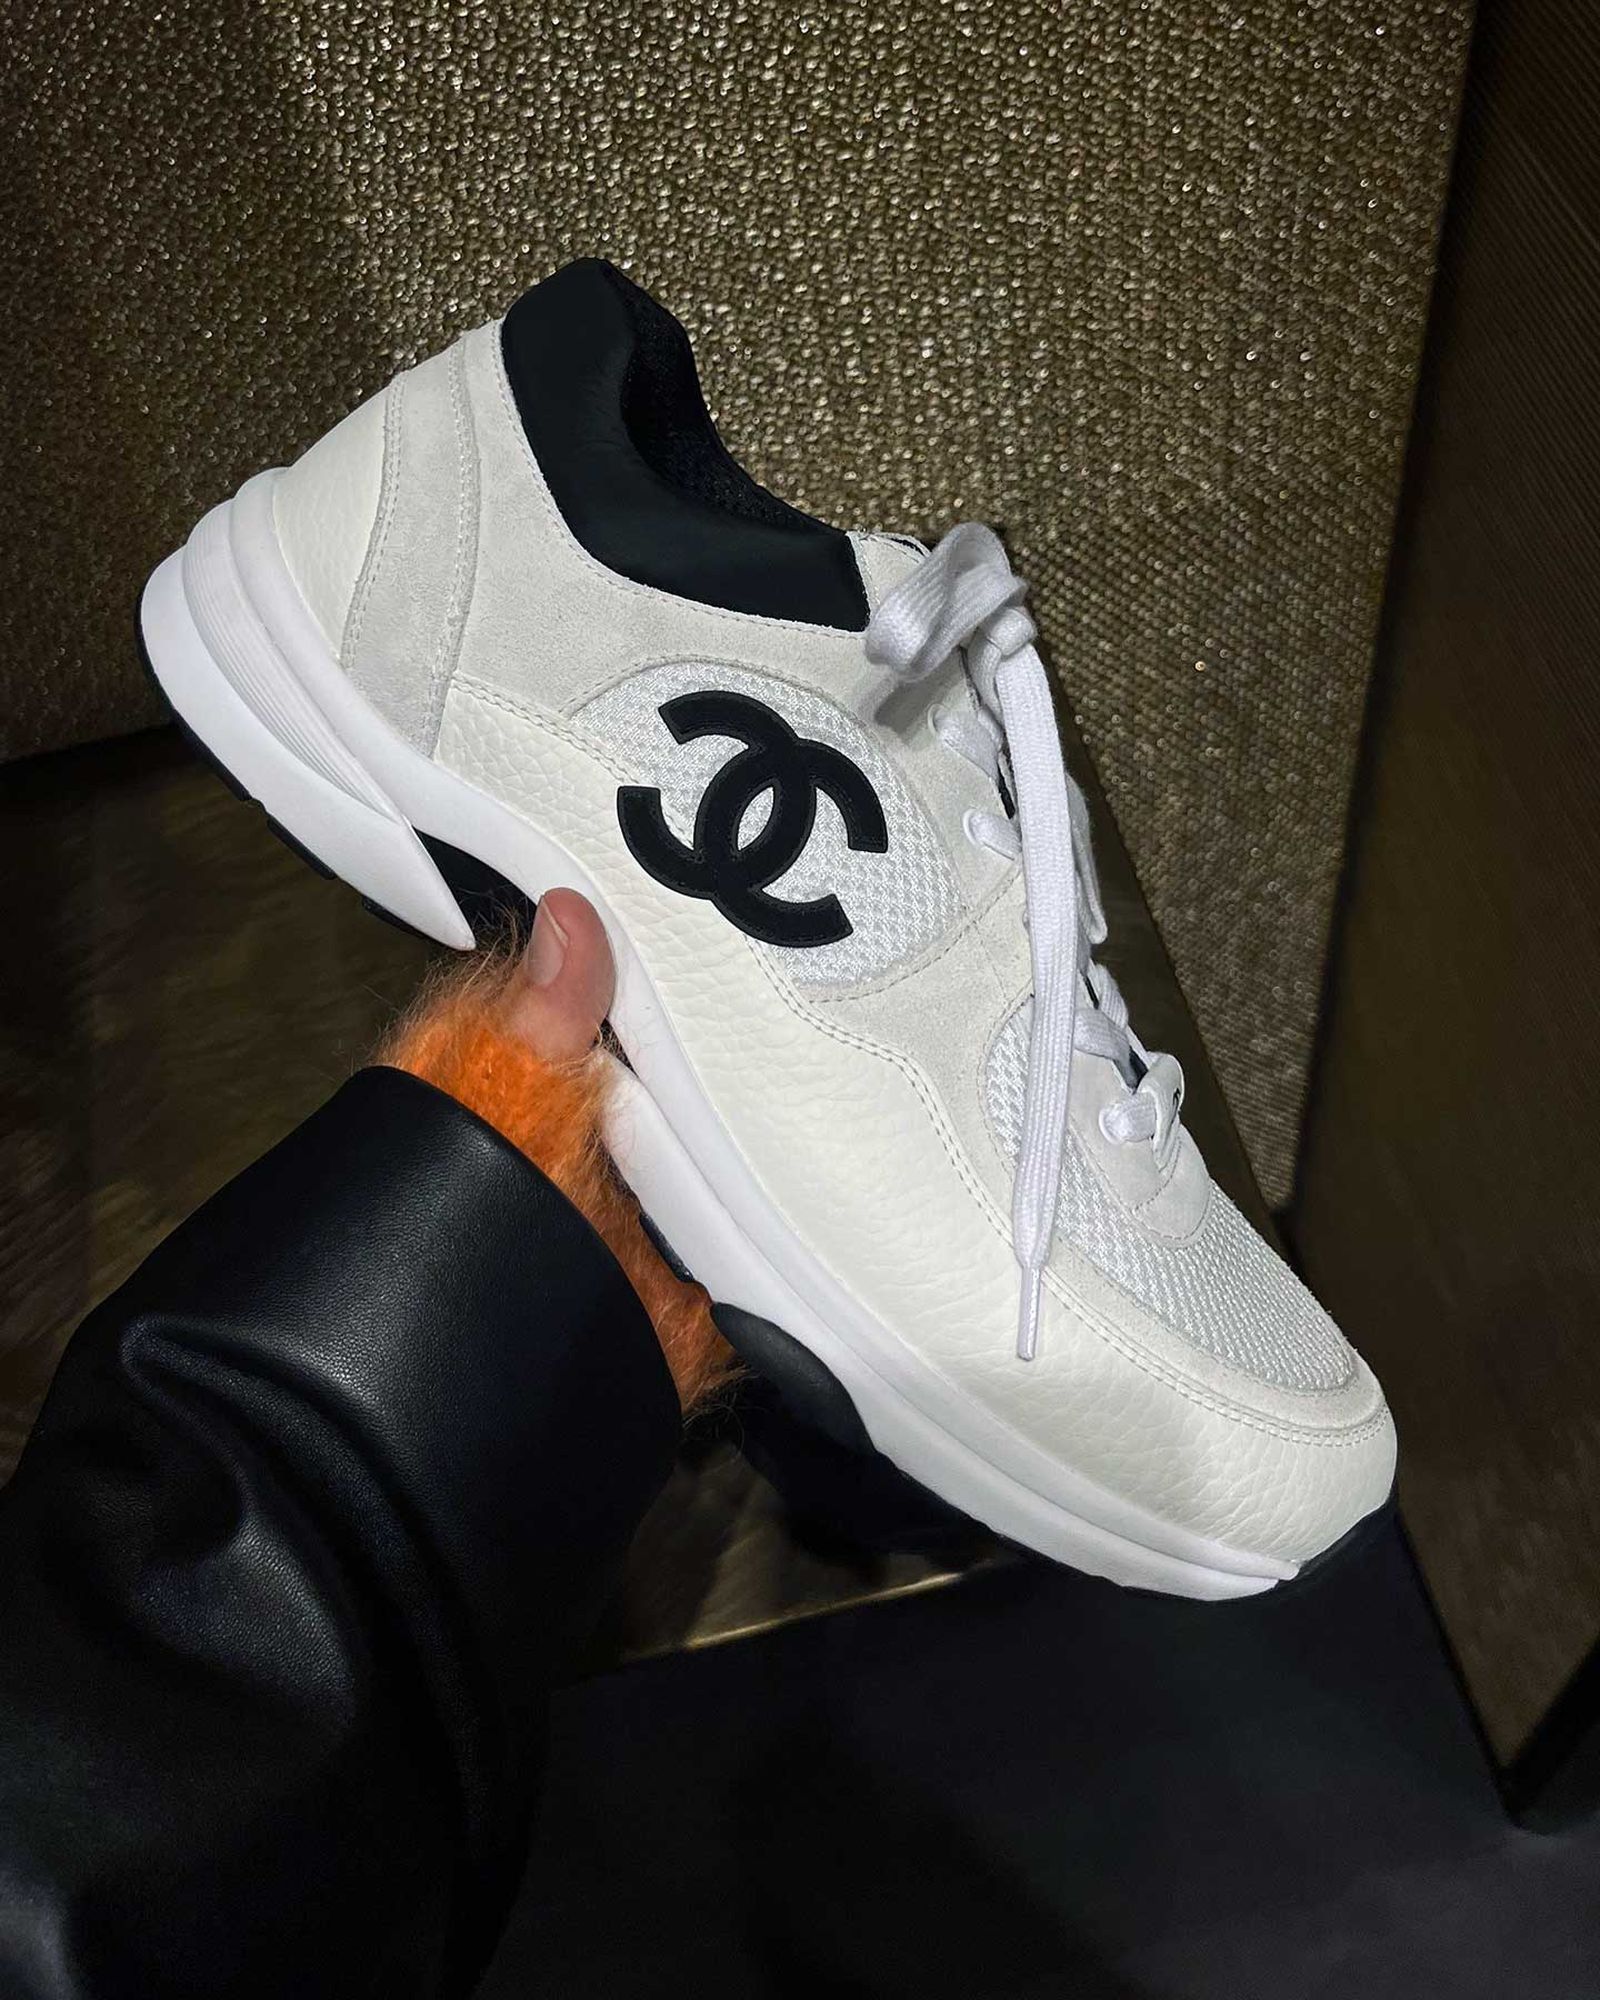 Chanel has stealthily the sneaker - HIGHXTAR.